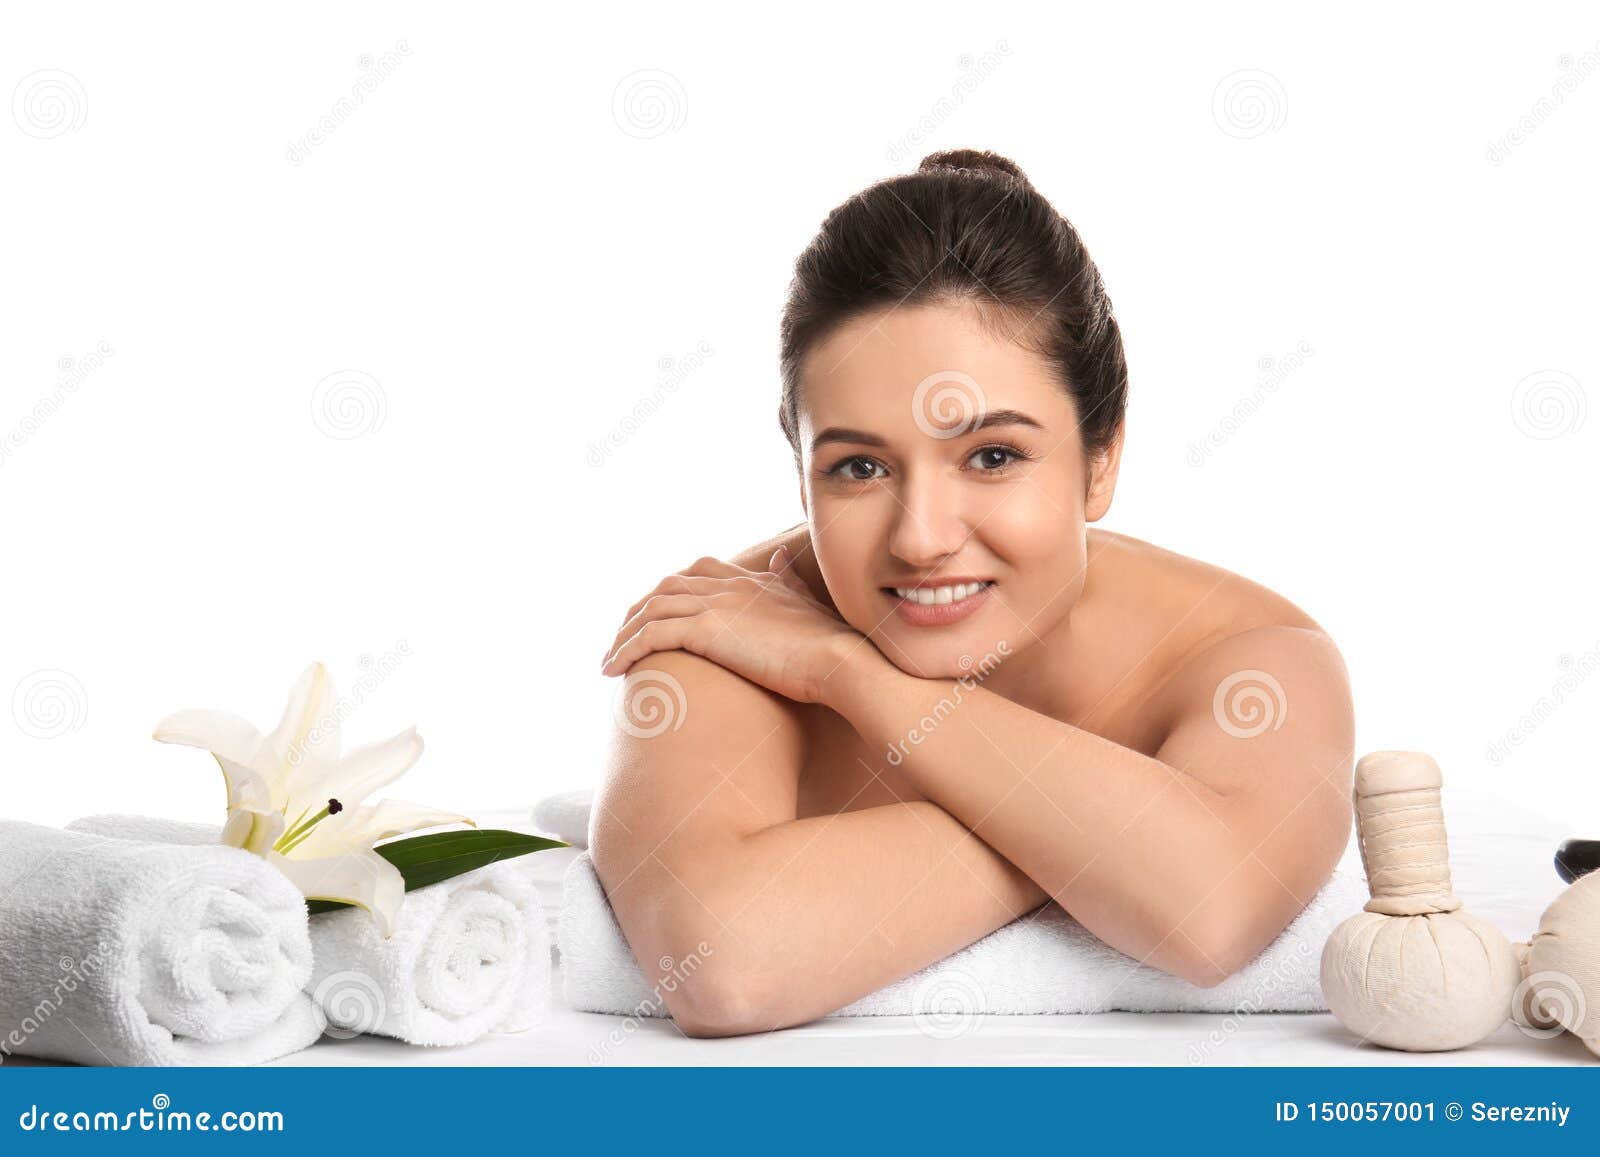 Young Woman Relaxing On Massage Table Against White Background Spa Procedures Stock Image